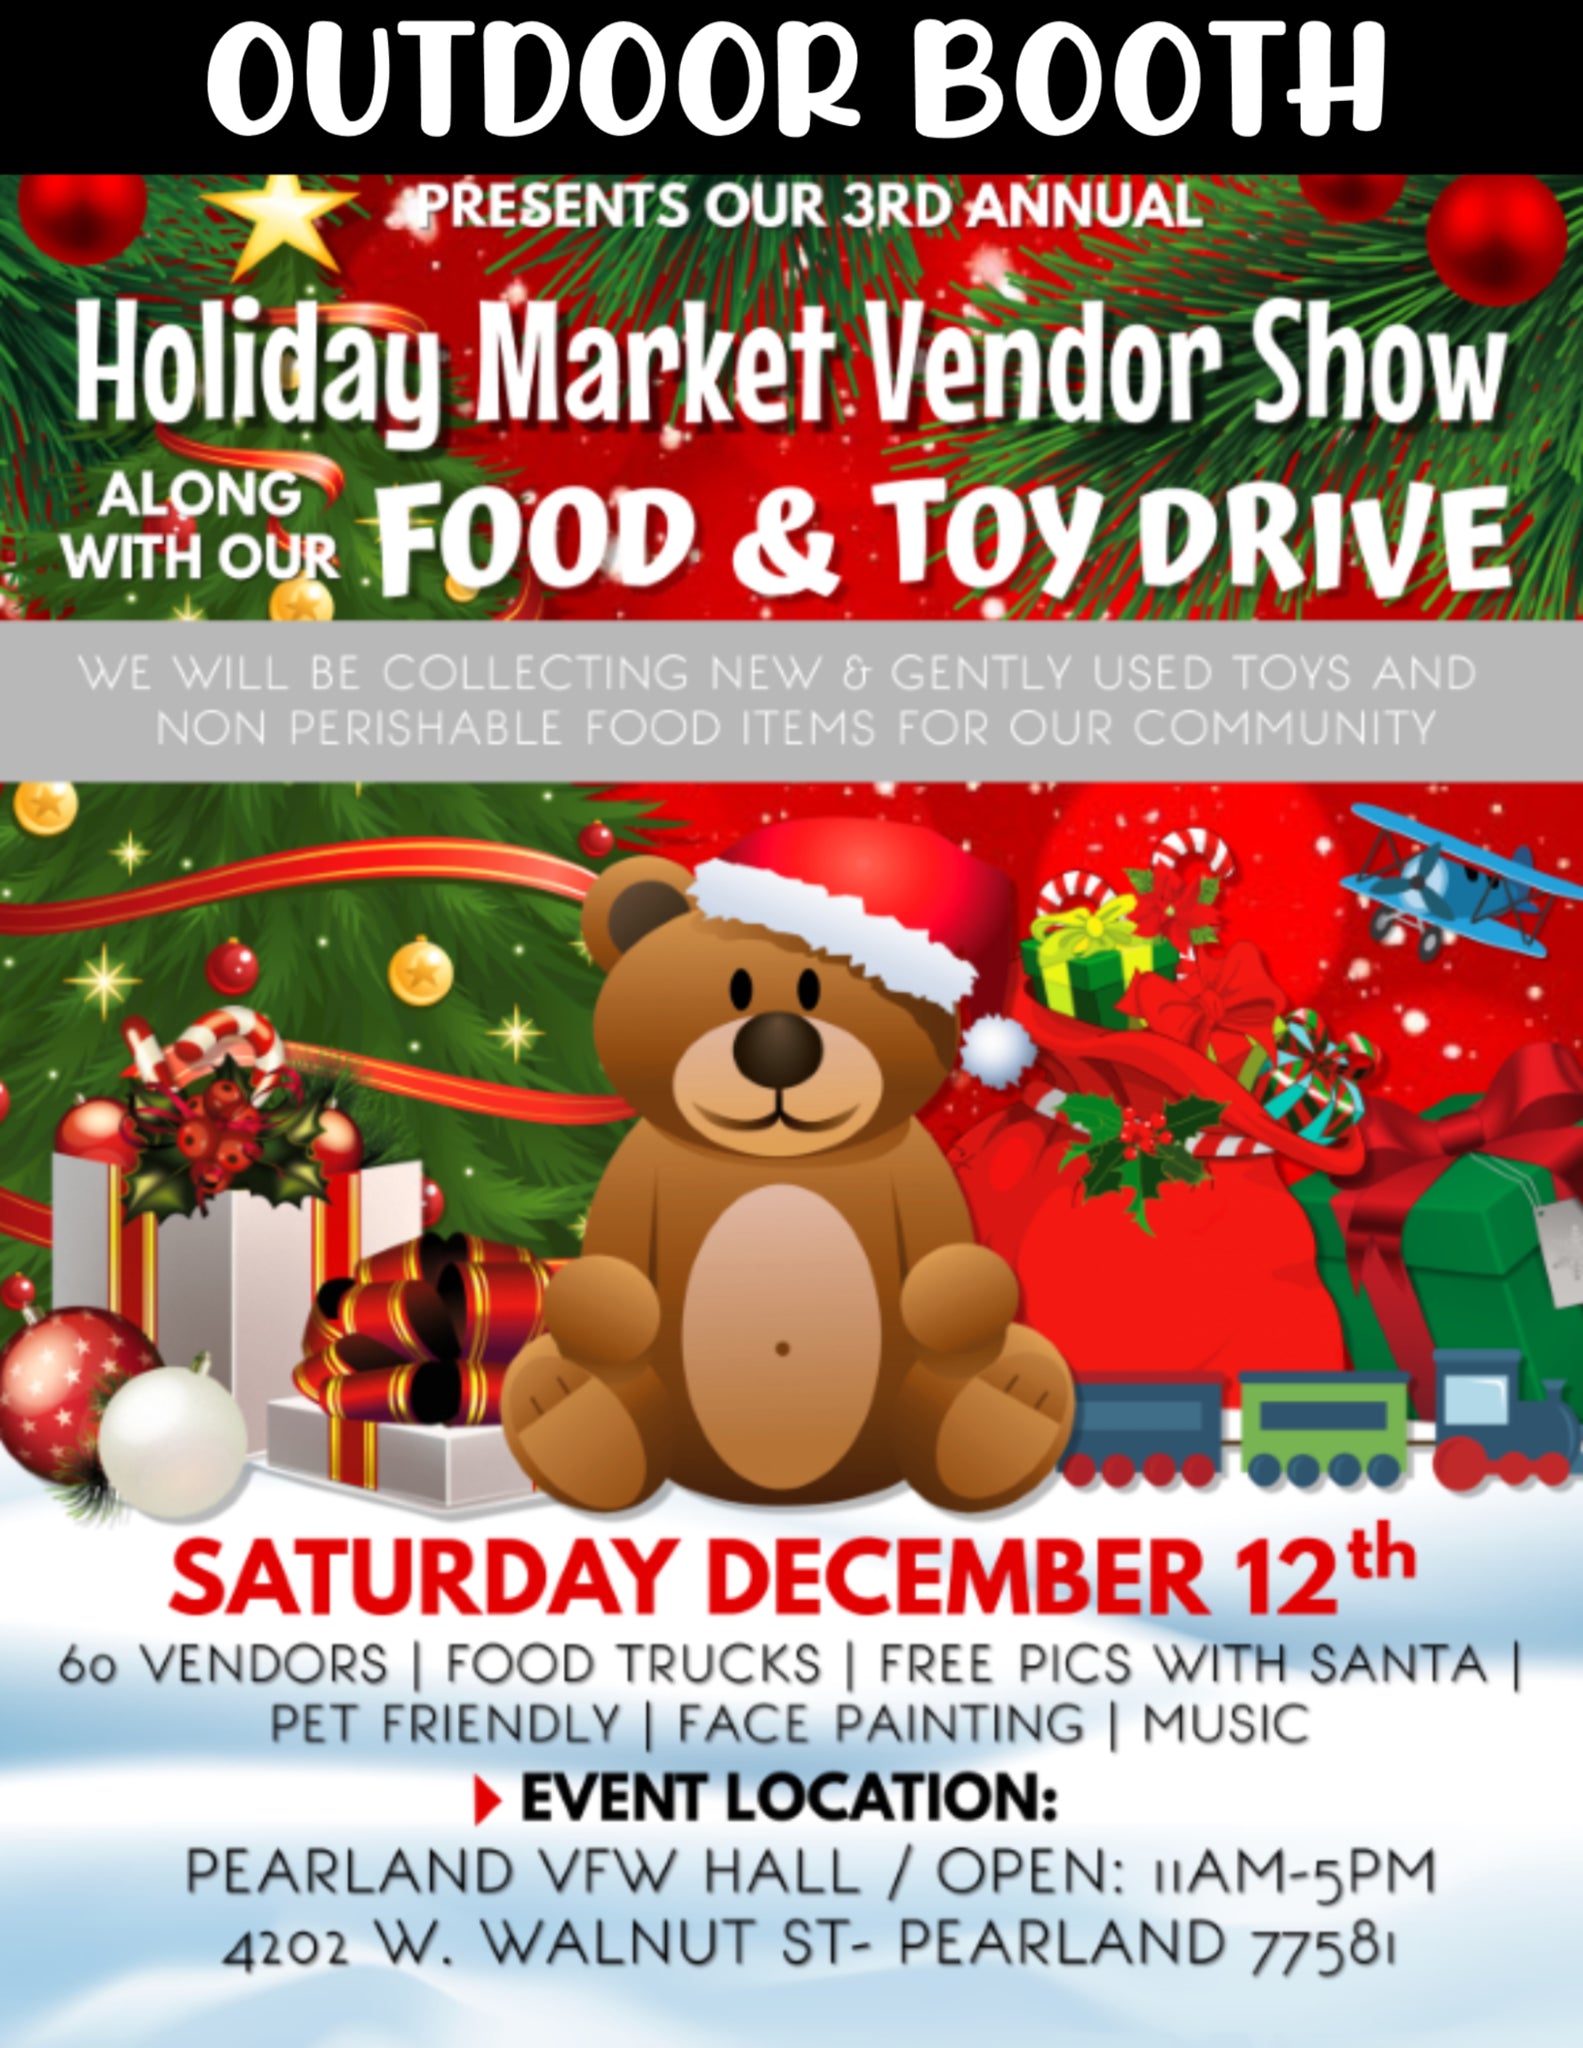 PEARLAND Saturday December 12th, 2020 - OUTDOOR BOOTH